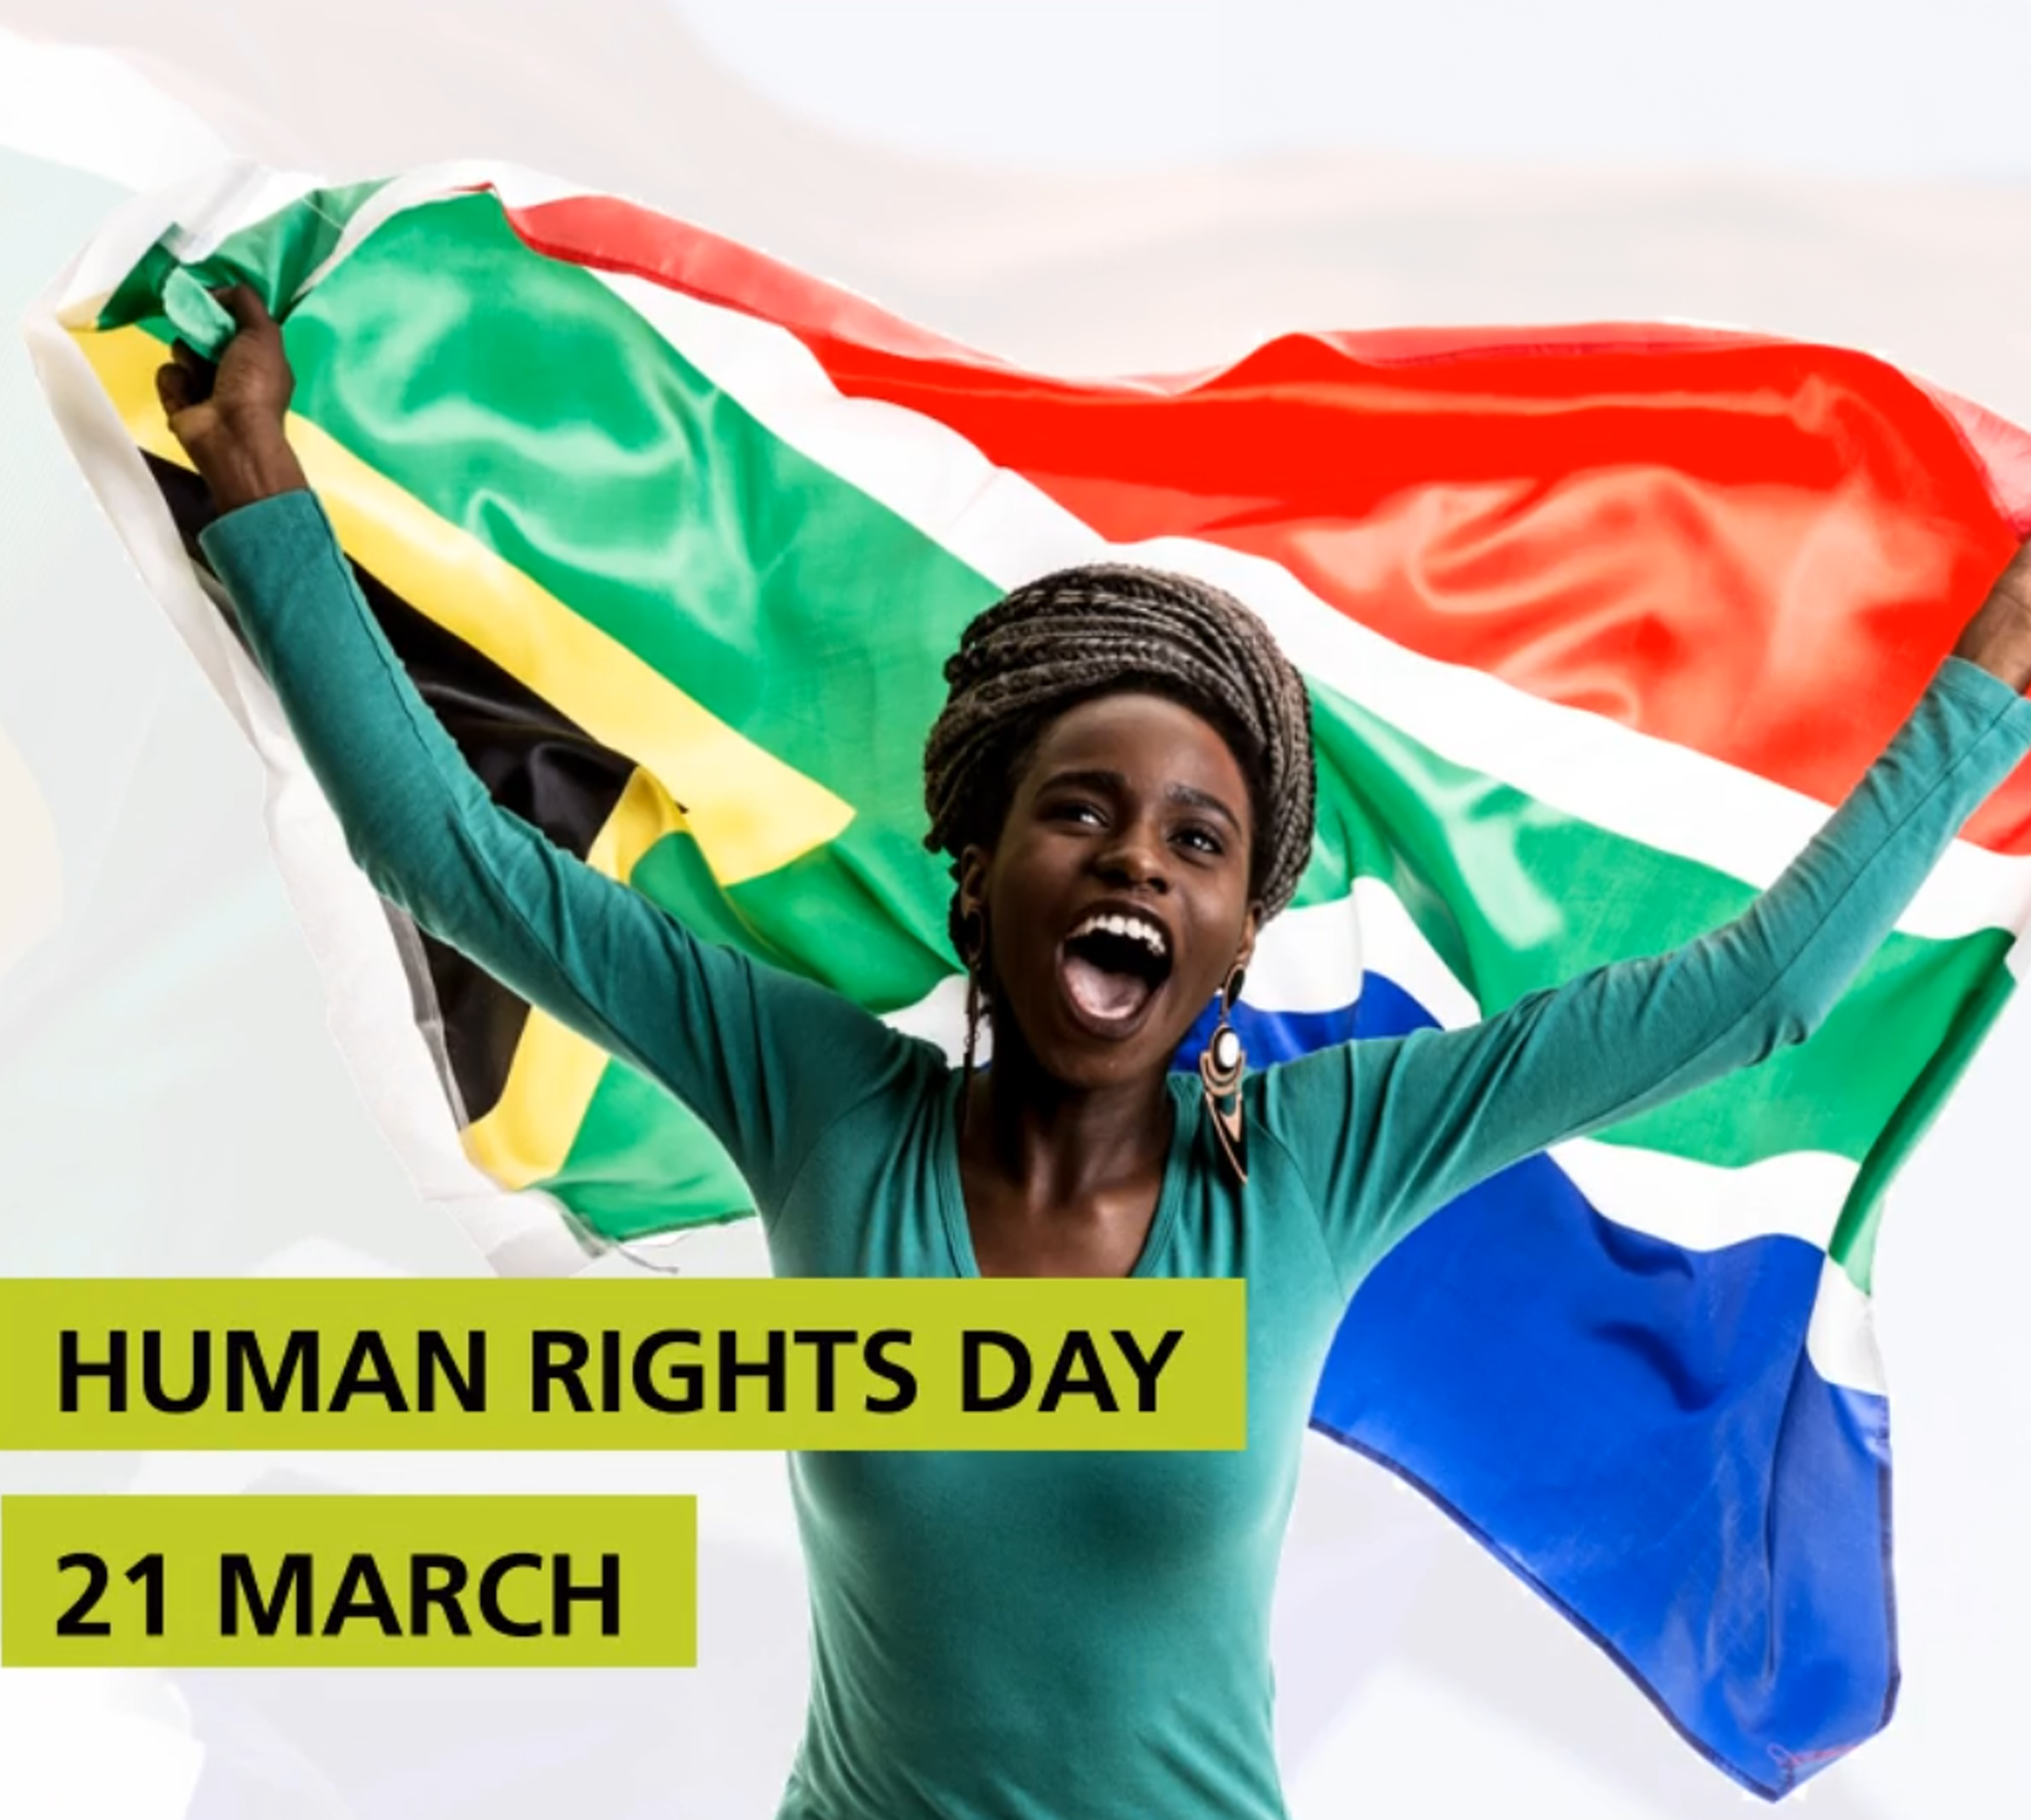 Happy Human Rights Day, South Africa